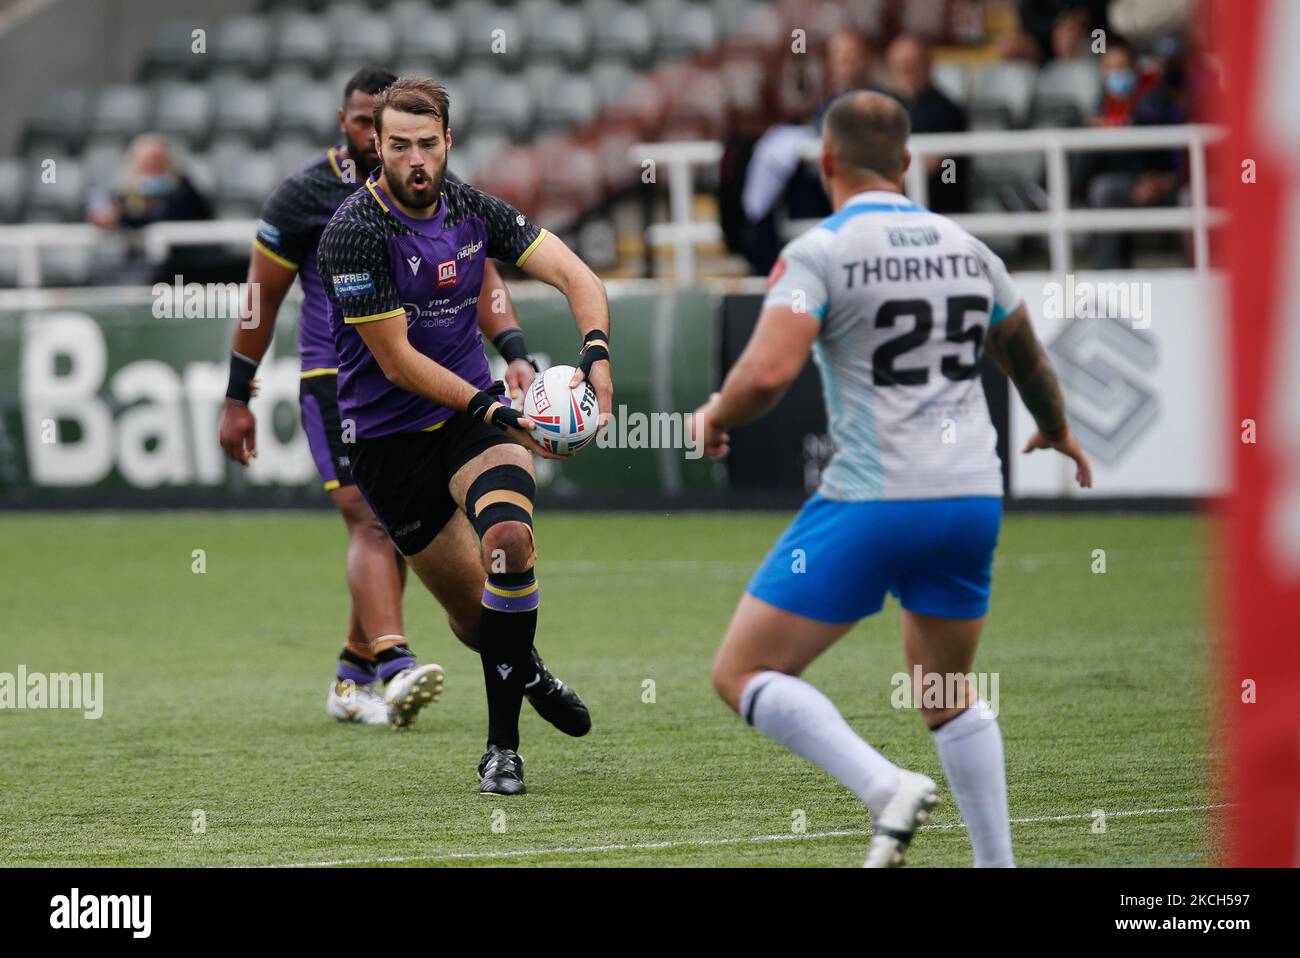 Jay Chapelhow of Newcastle Thunder in action during the BETFRED Championship match between Newcastle Thunder and Dewsbury Rams at Kingston Park, Newcastle on Sunday 11th July 2021. (Photo by Chris Lishman/MI News/NurPhoto) Stock Photo